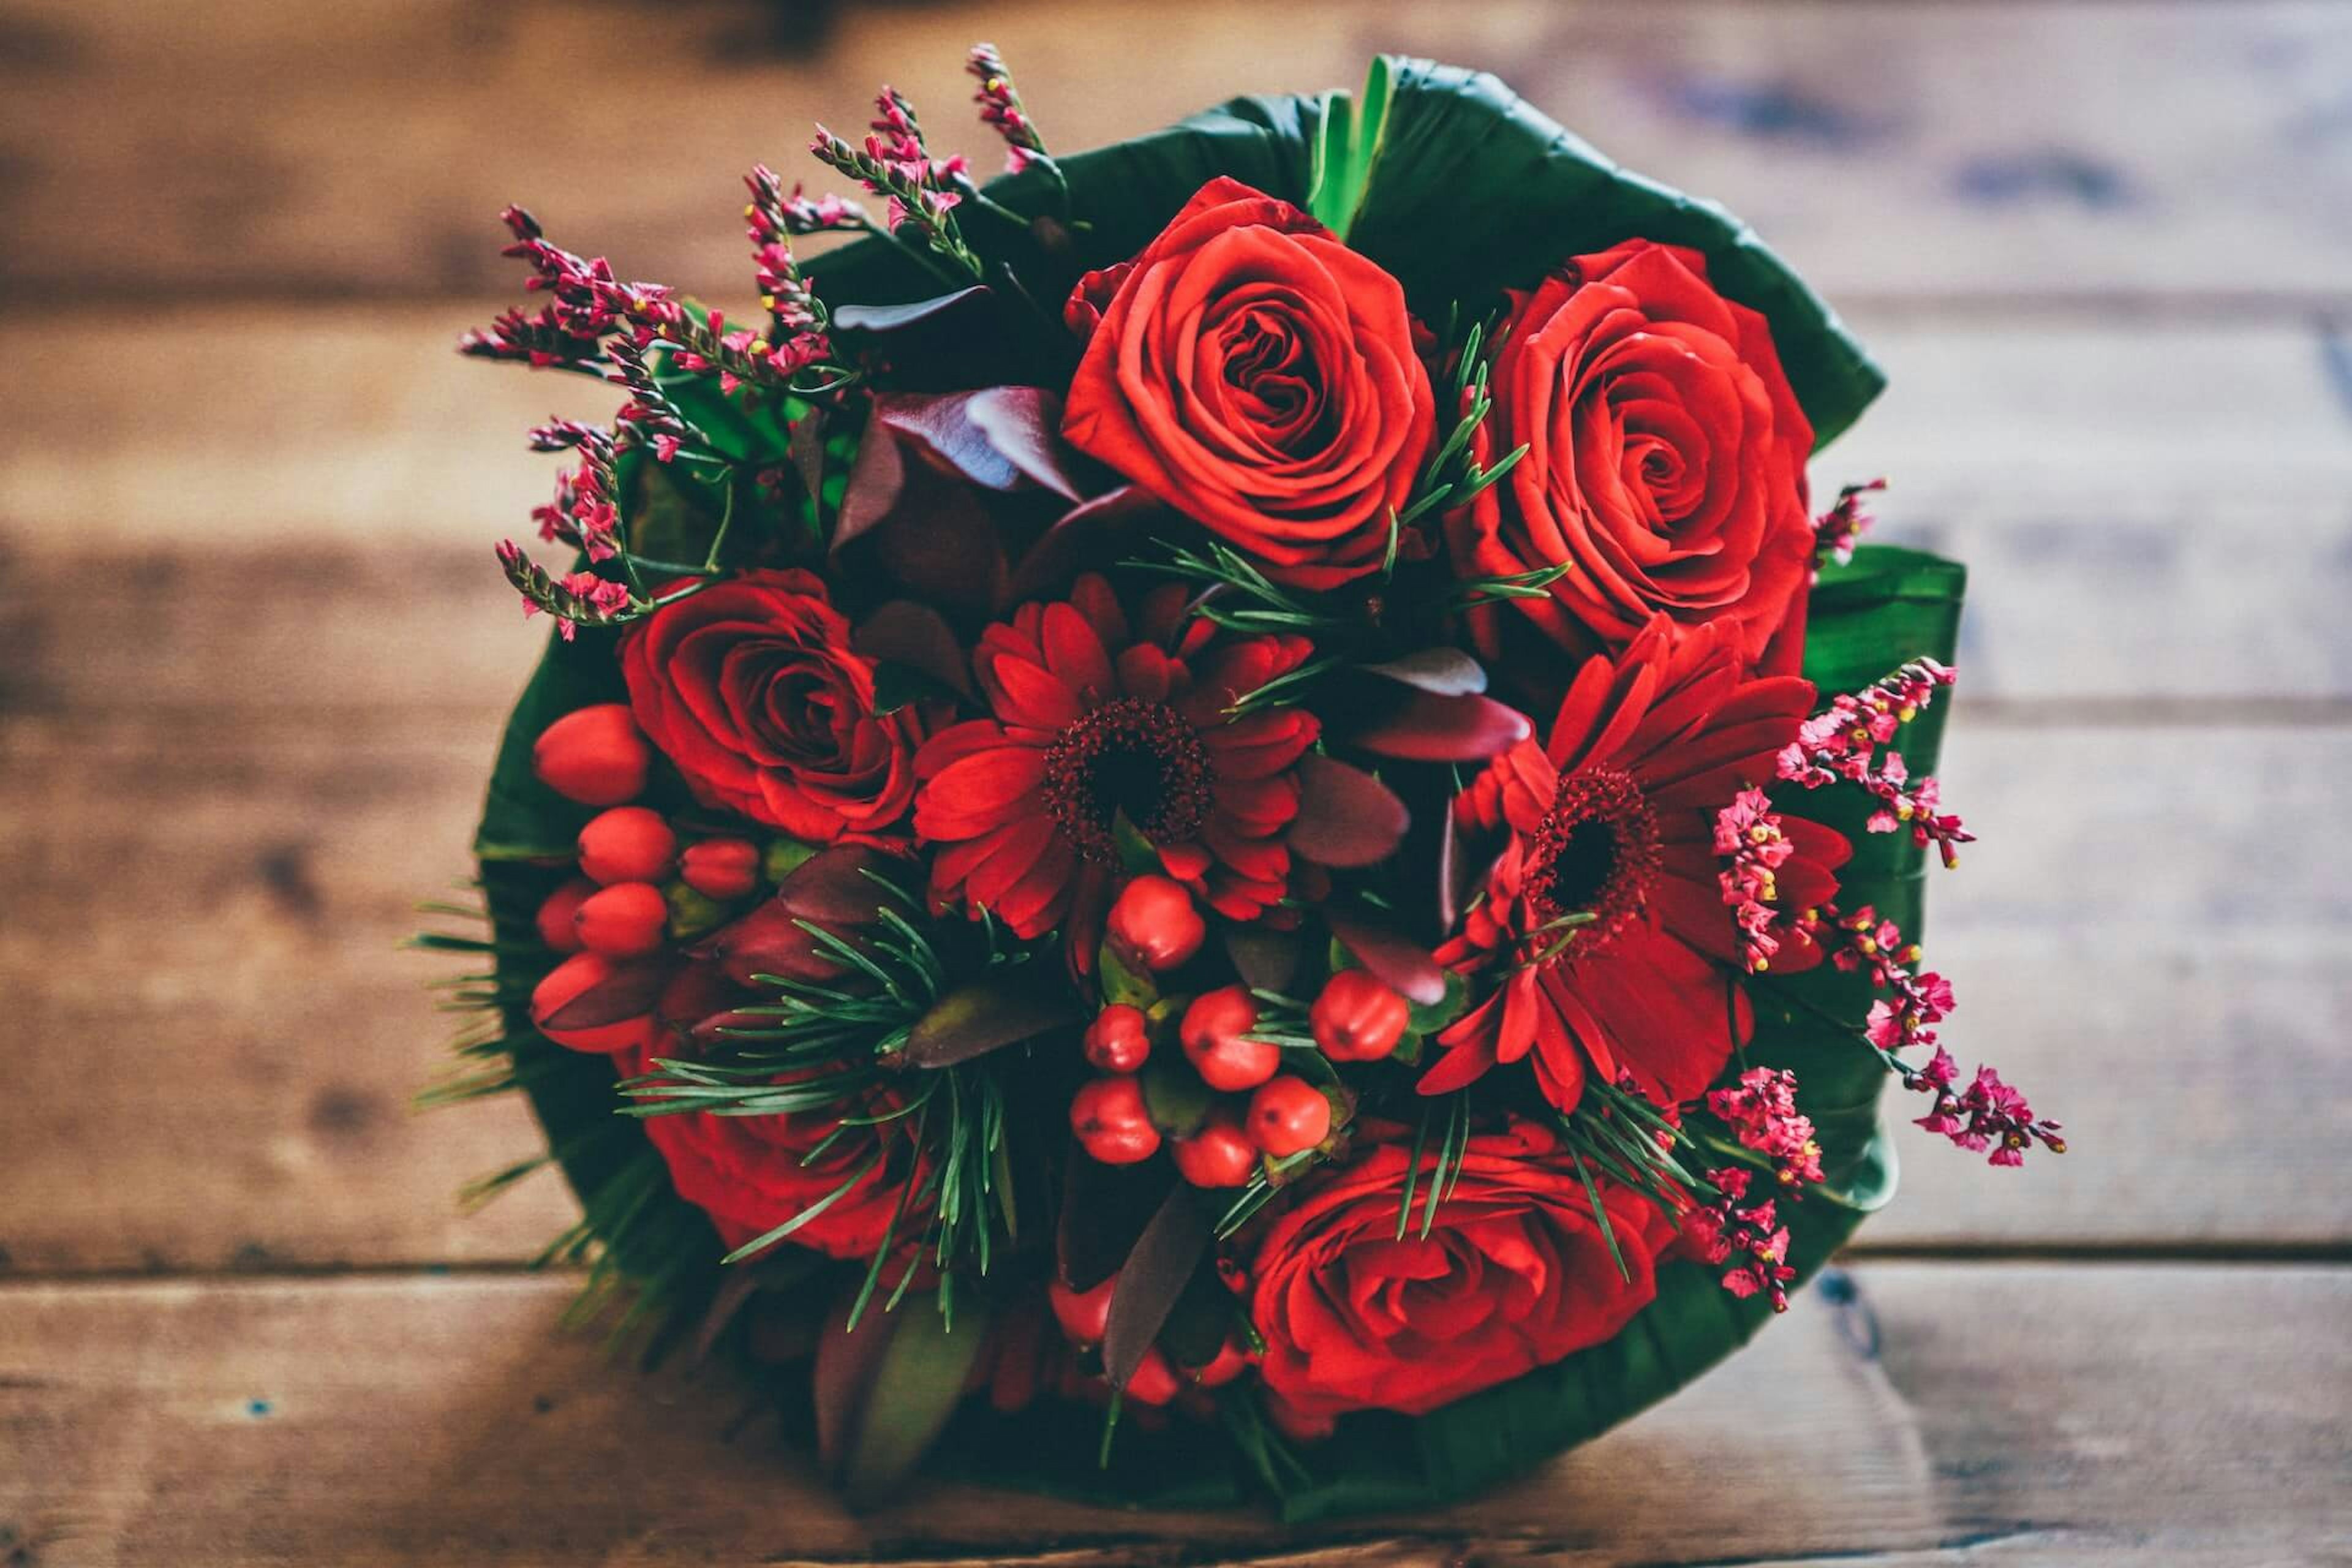 6 Ways to Extend the Life of Your Beautiful Bouquet